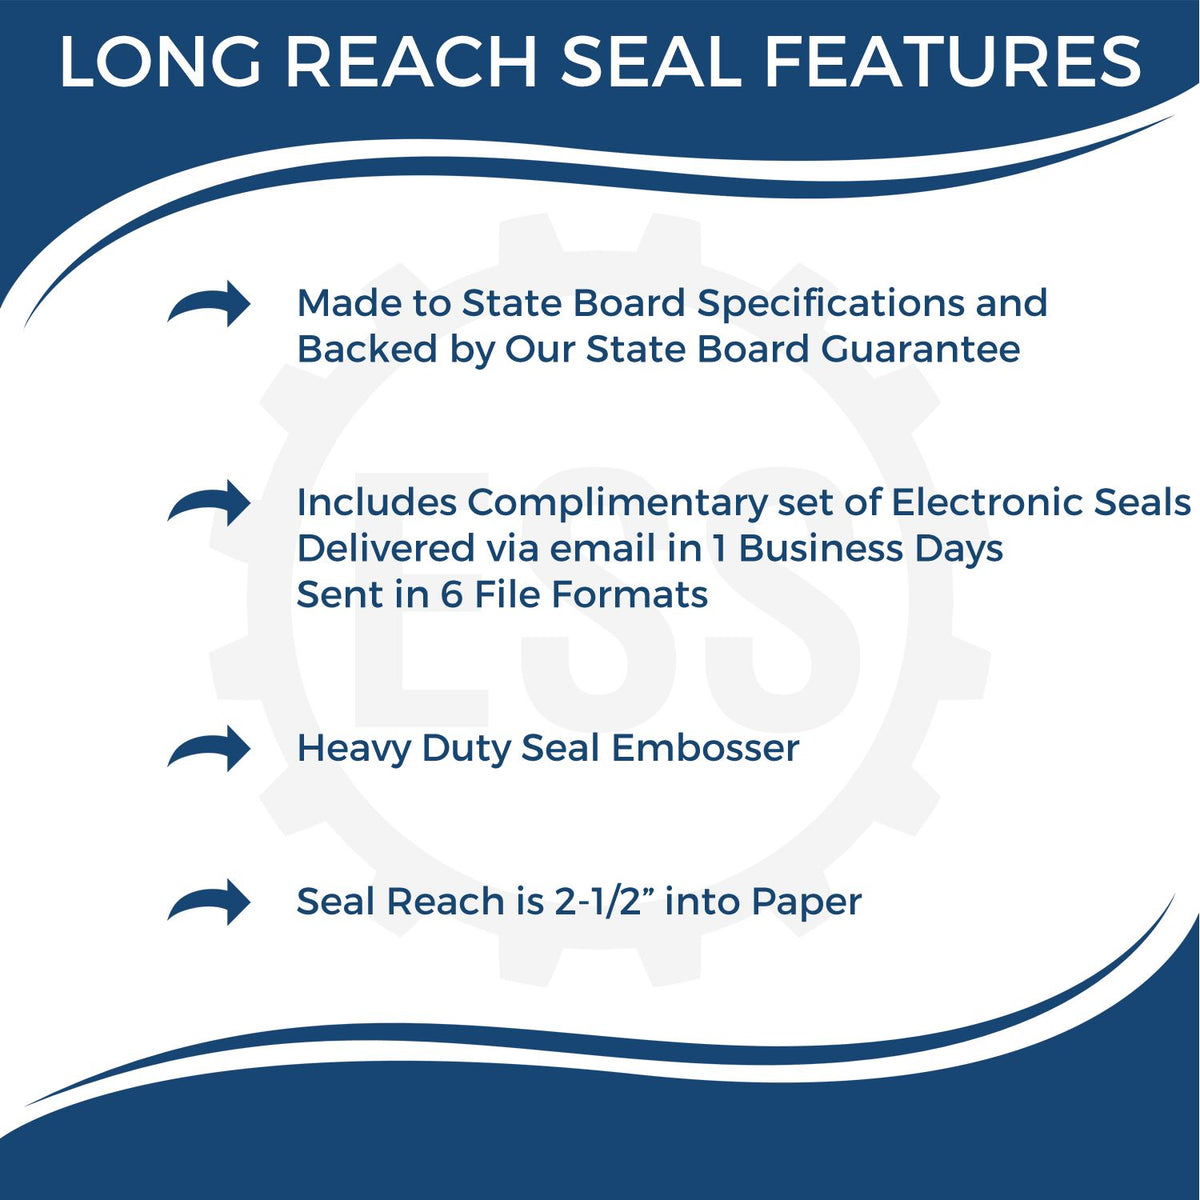 A picture of an infographic highlighting the selling points for the Long Reach Arkansas PE Seal